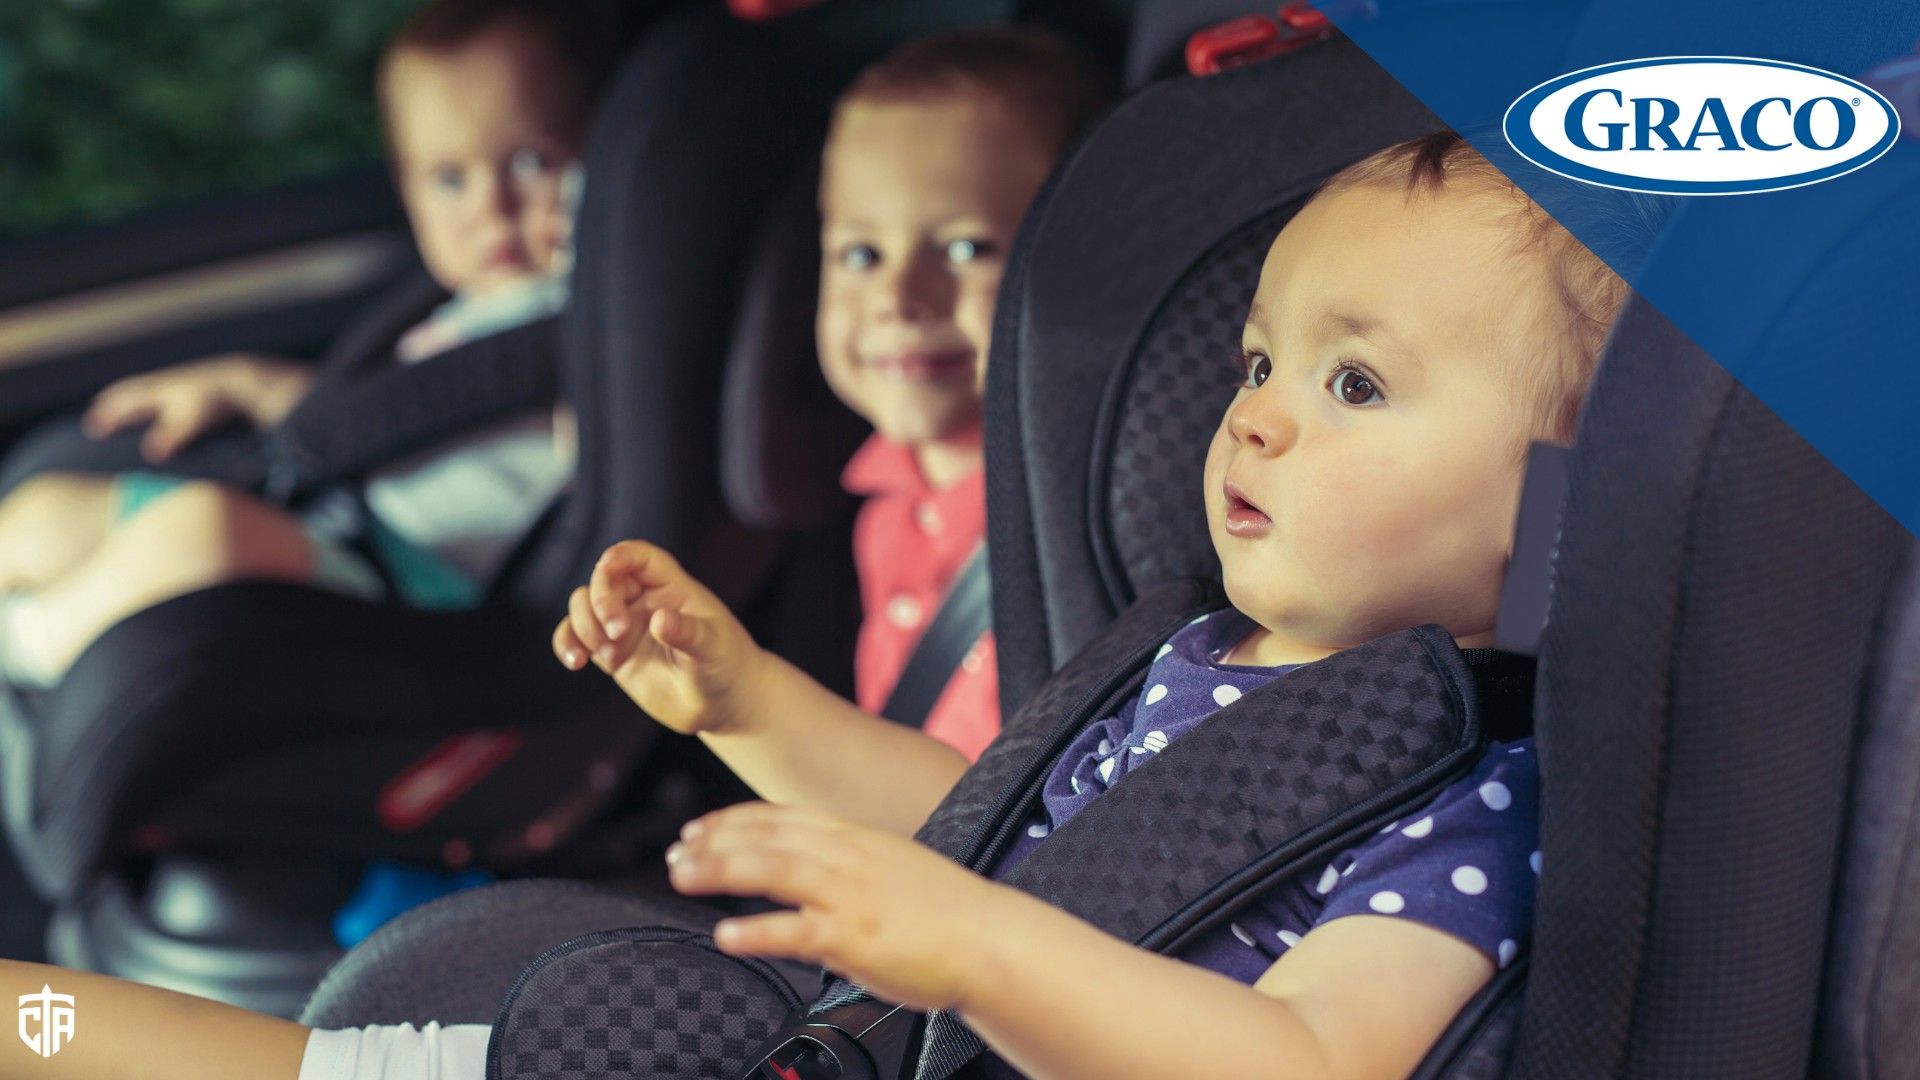 Children sit in car seats in the back of a vehicle - Graco car seats